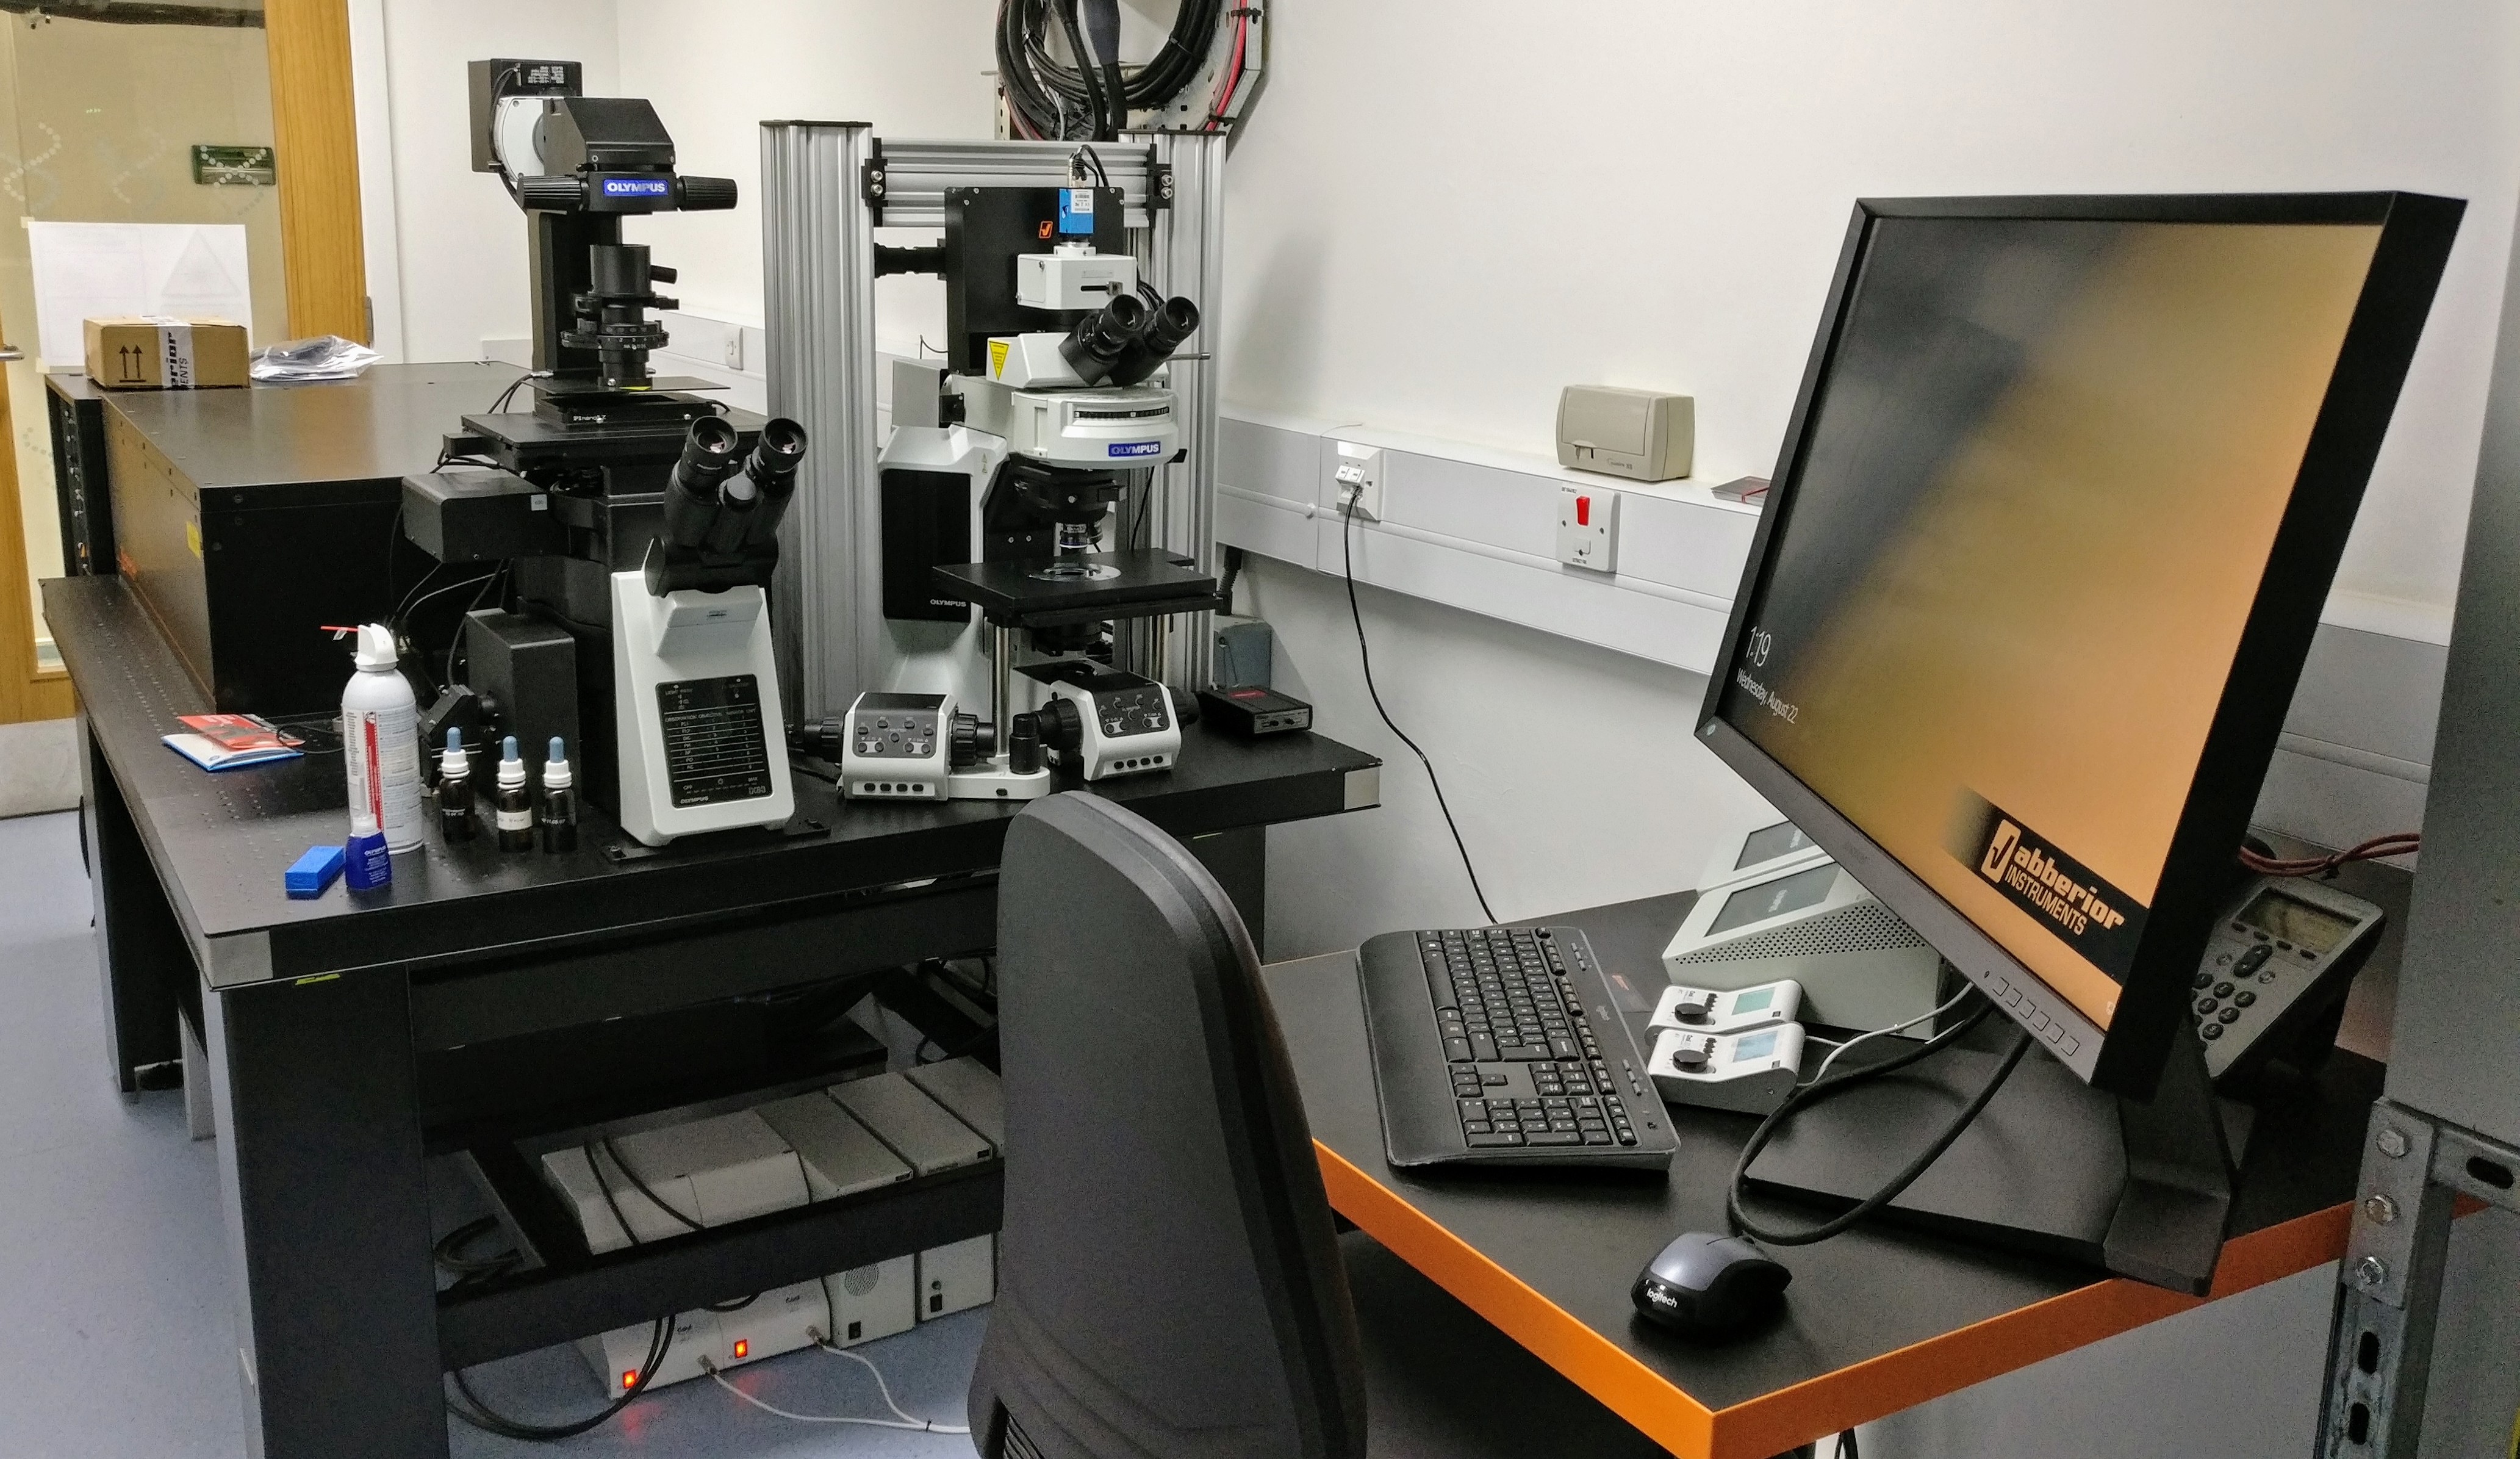 New STED super-resolution microscope